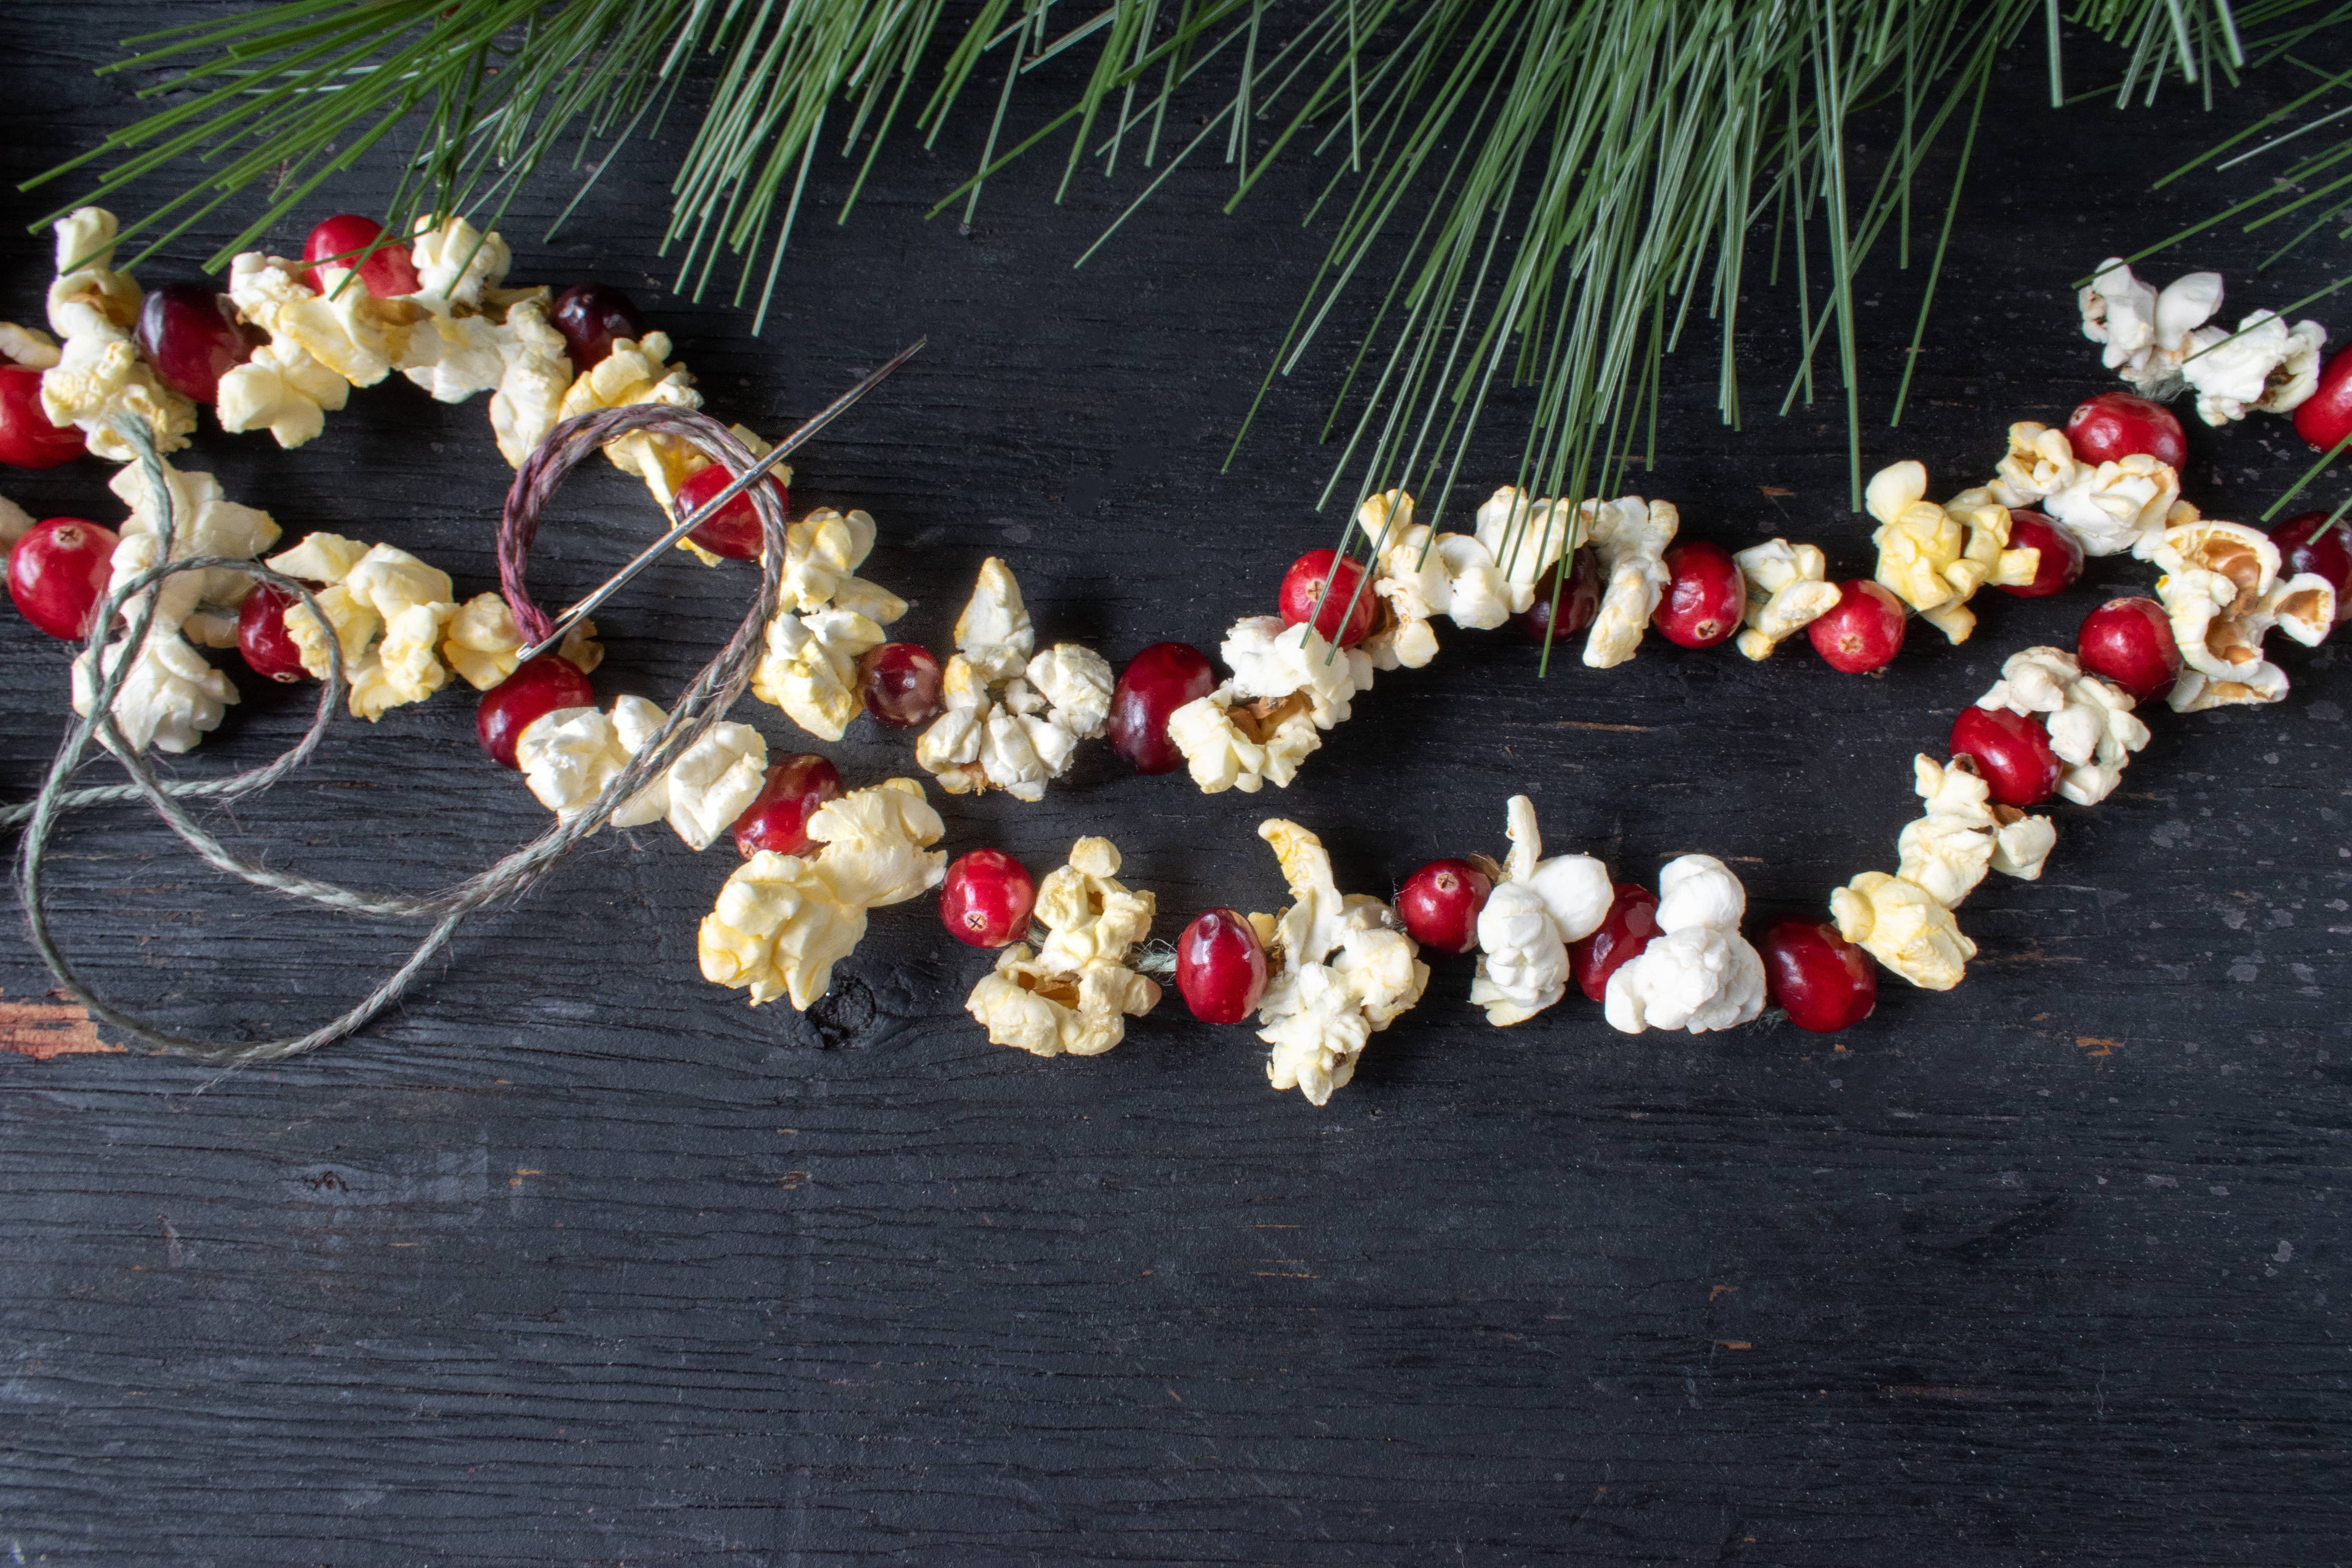 A garland of popcorn and berries